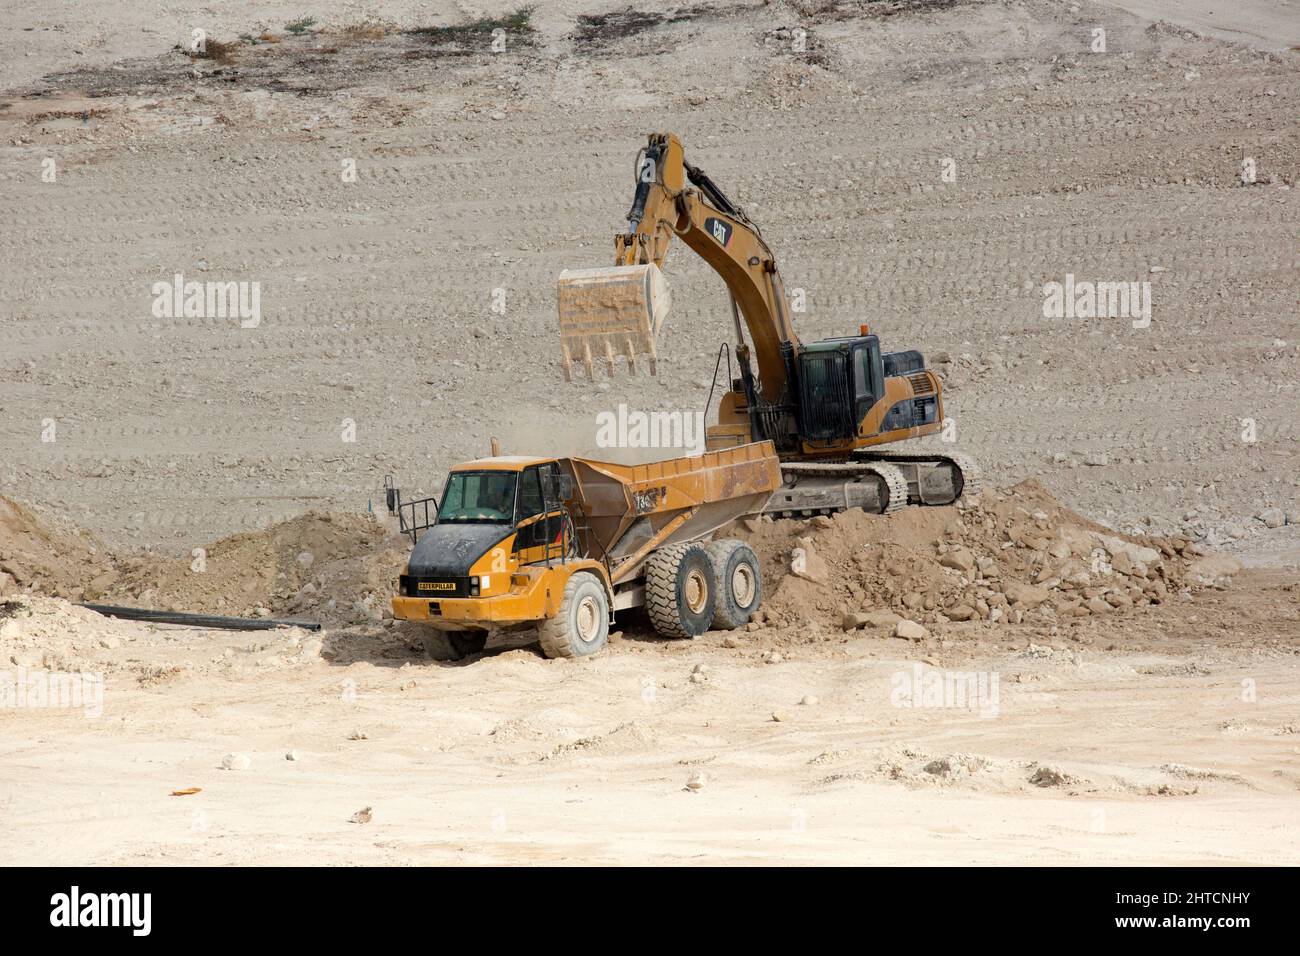 Heavy earth moving equipment clearing the ground for a large scale civil engineering project Stock Photo